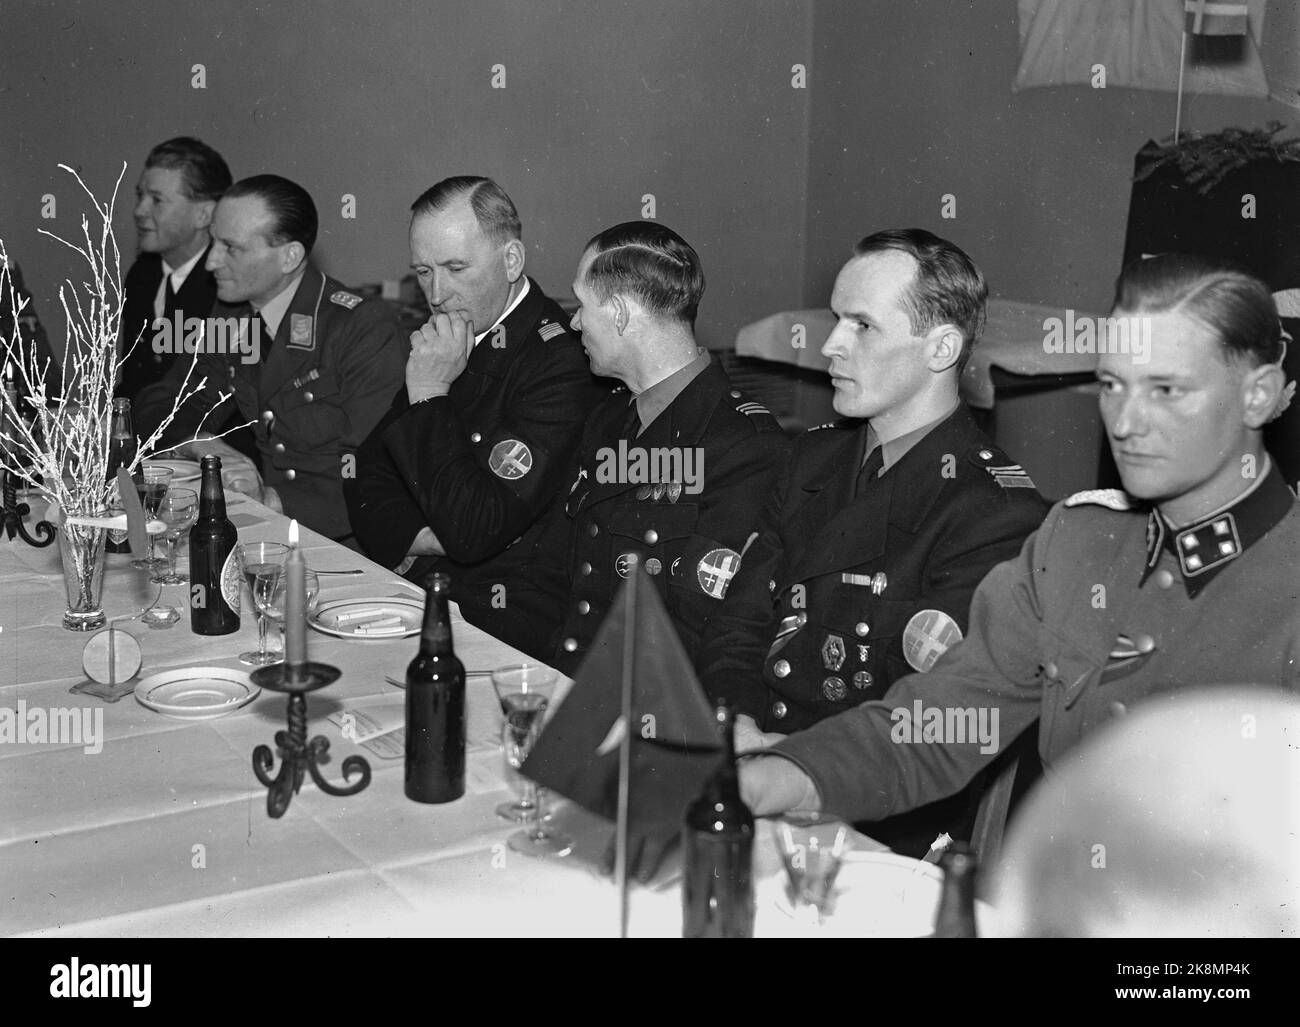 February 1943. Hirden Flykorps Christmas party. Hirden's Christmas party) in Stortingsgata 20. All wearing Nazi uniforms. Karl Marthinsen and Thorvald Thronsen participated. Photo: Johnsen / NTB Stock Photo